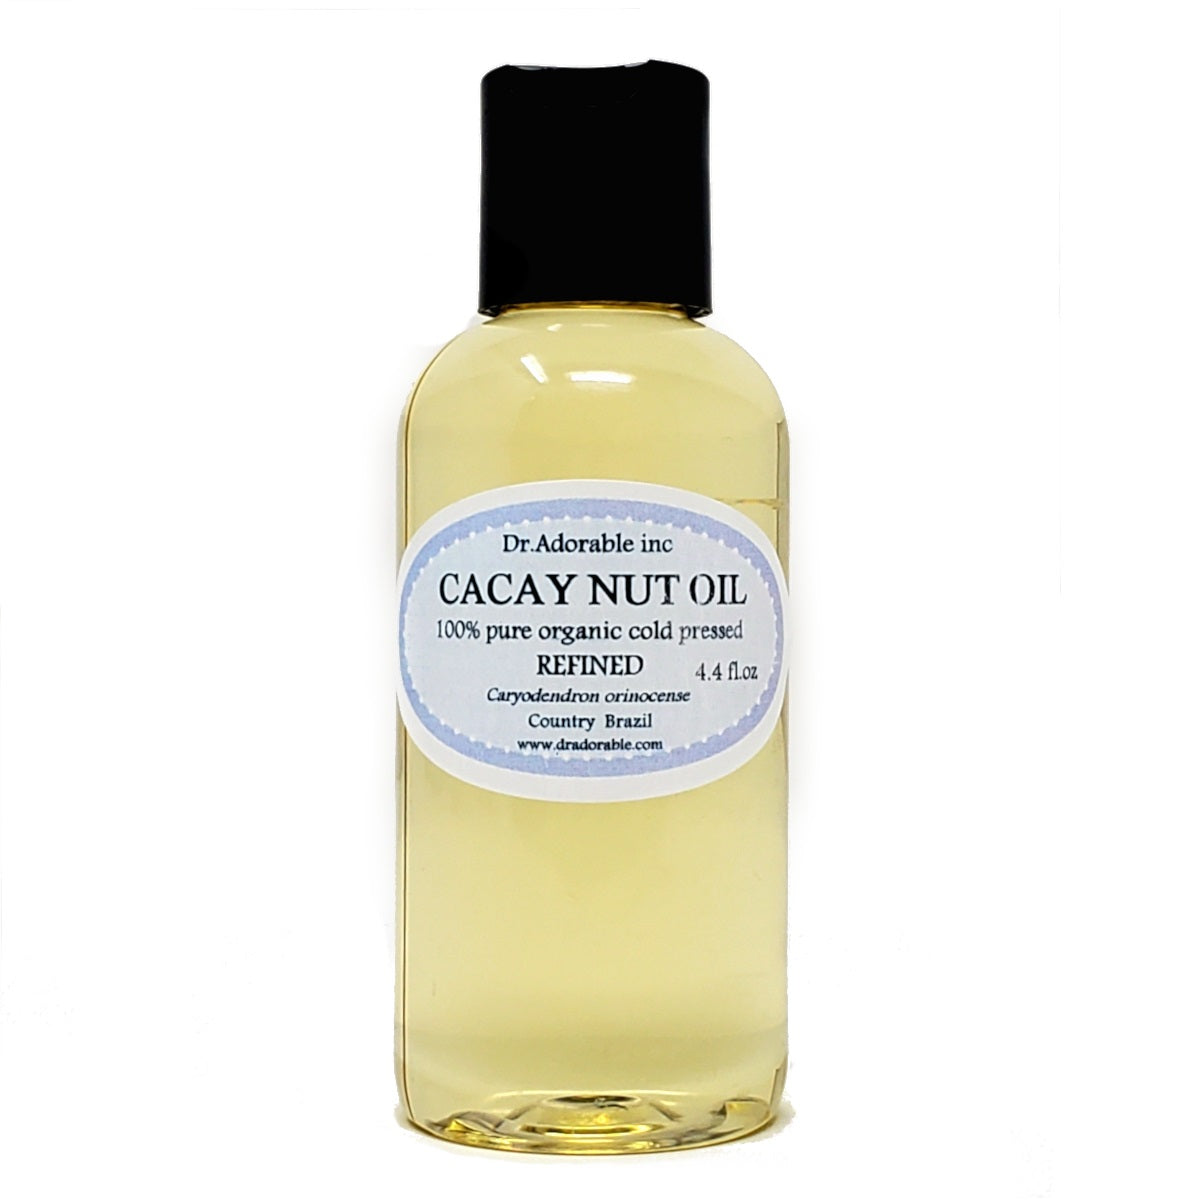 Cacay Nut Oil - Pure Cold Pressed Organic Fresh Skin Hair Care